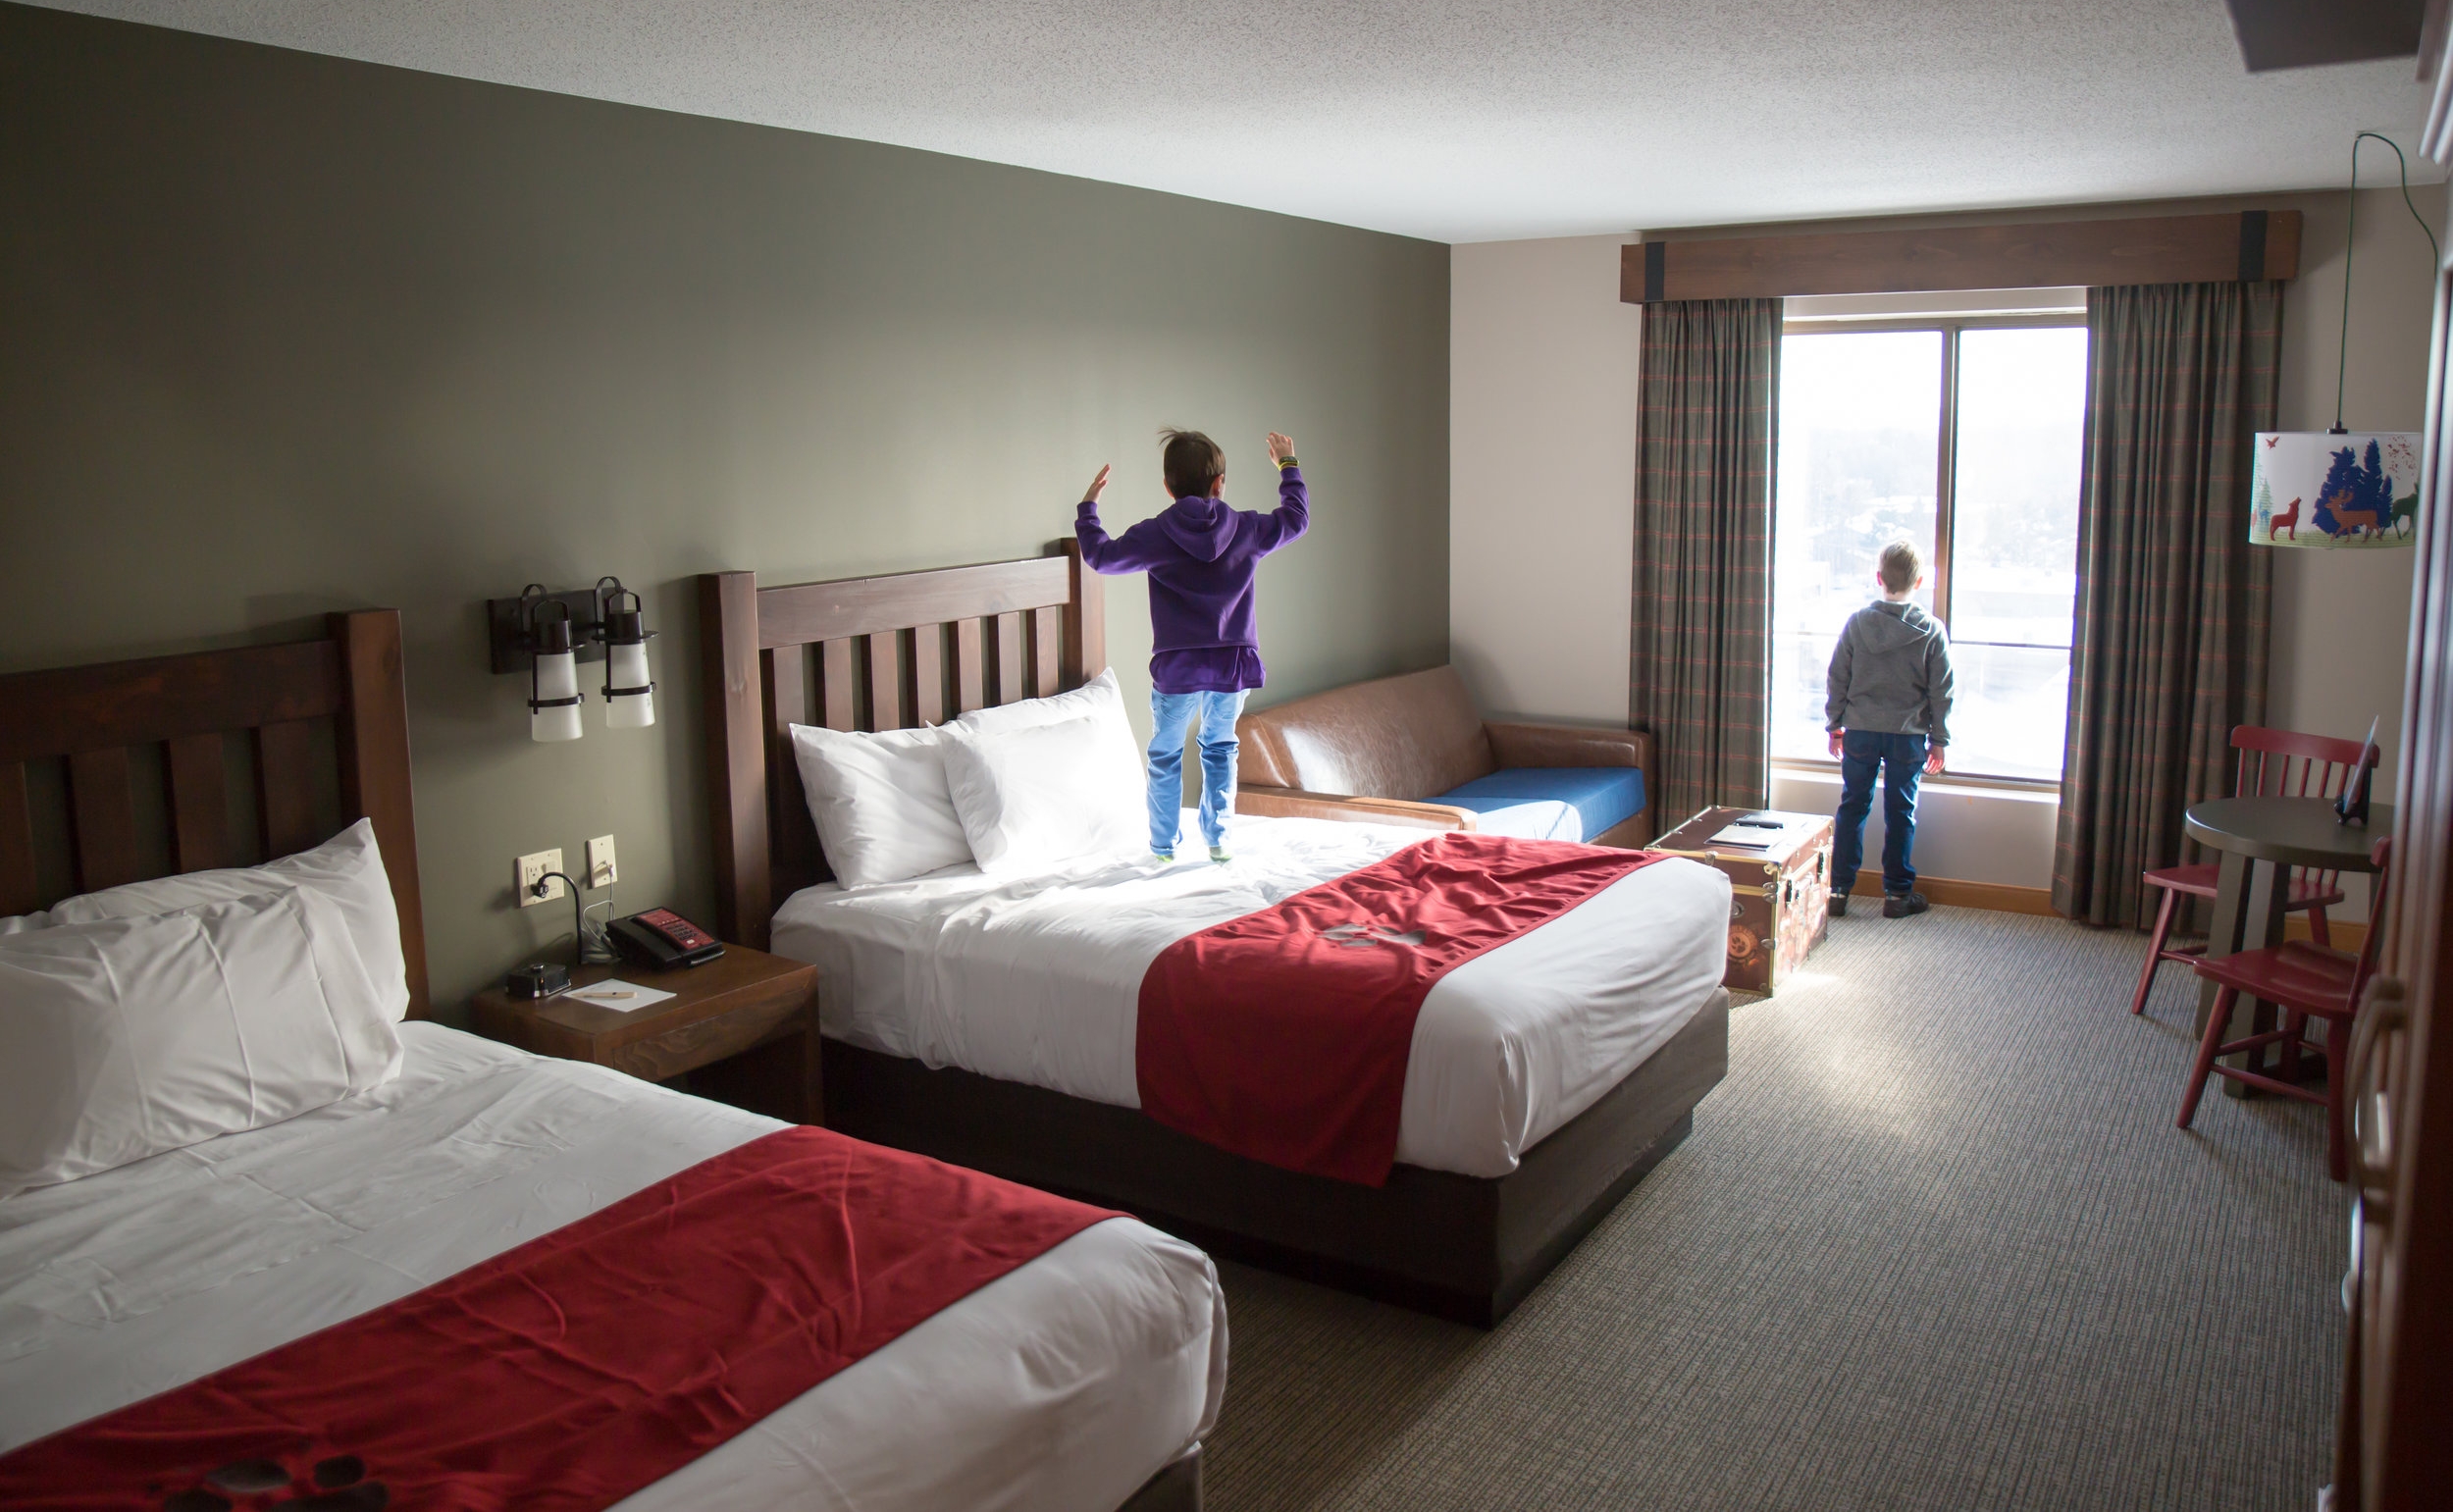 A Review Of The New Great Wolf Lodge In Bloomington